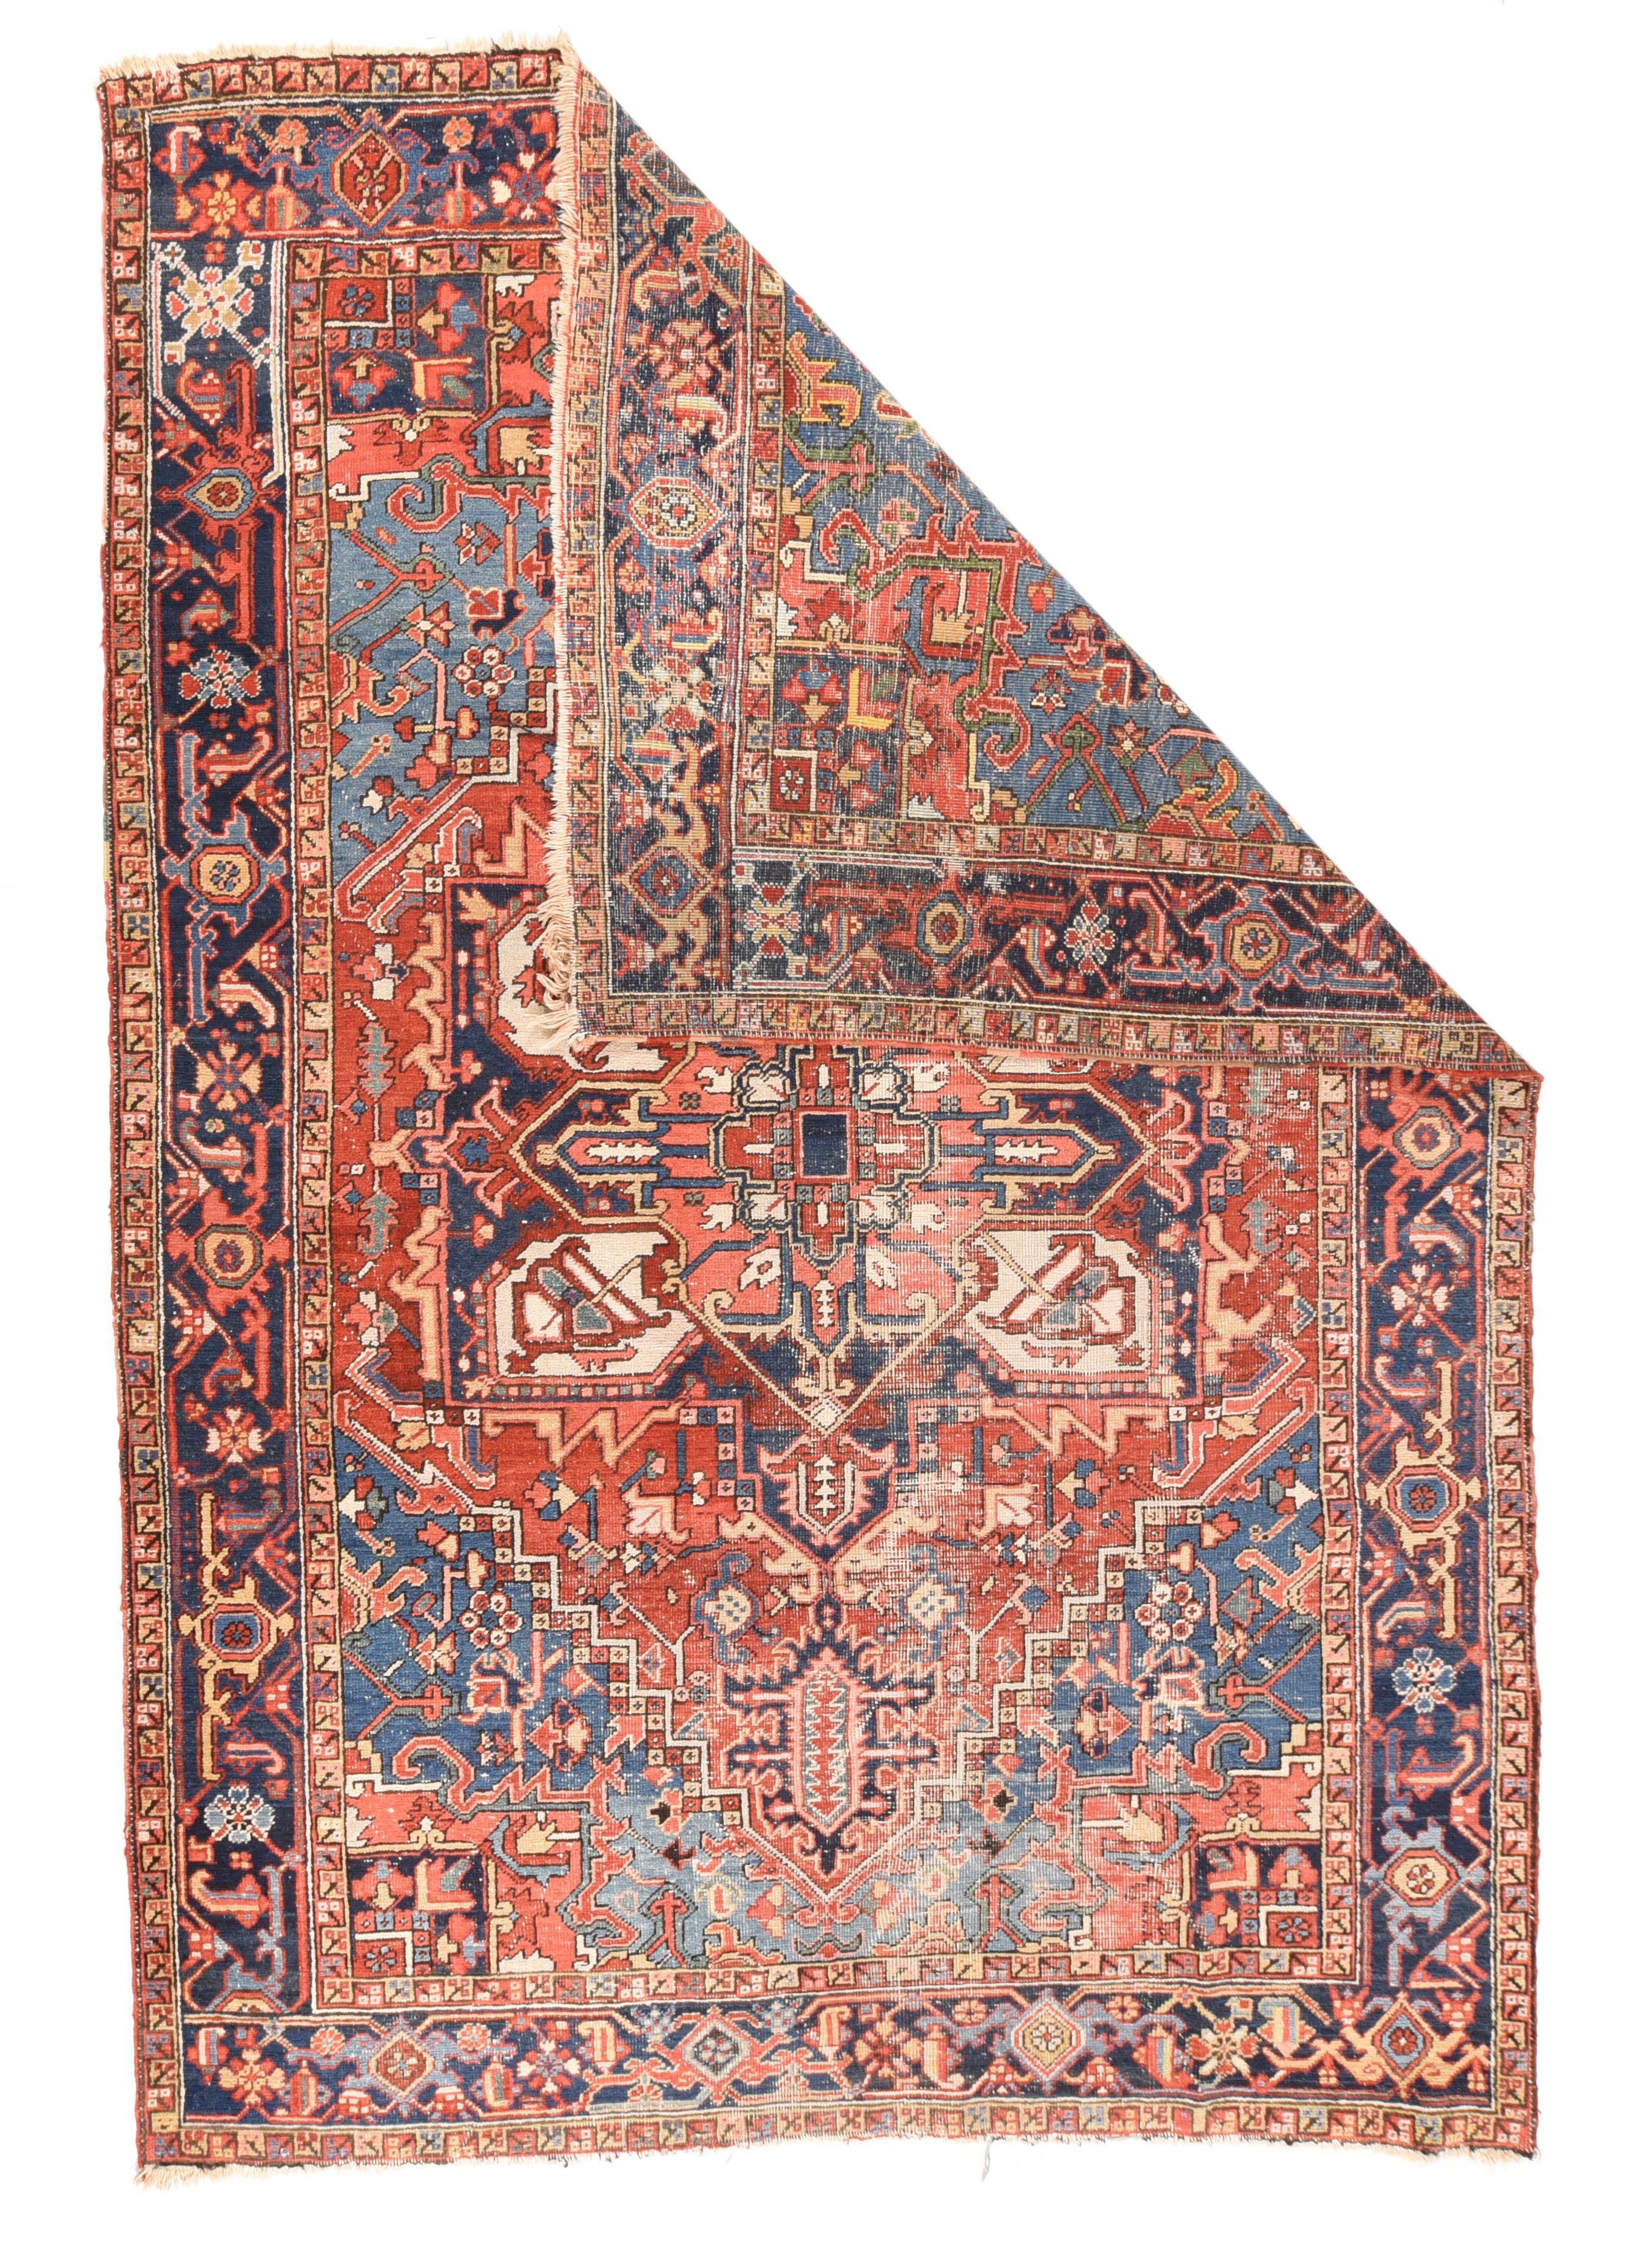 Antique Heriz Rug 6'8'' x 9'10''. Although spot-distressed, this NW Persian rural carpet still possesses noble points including the conjoint corners in transparent ice blue, and the strong navy and ecru radiating palmette octogramme medallion.